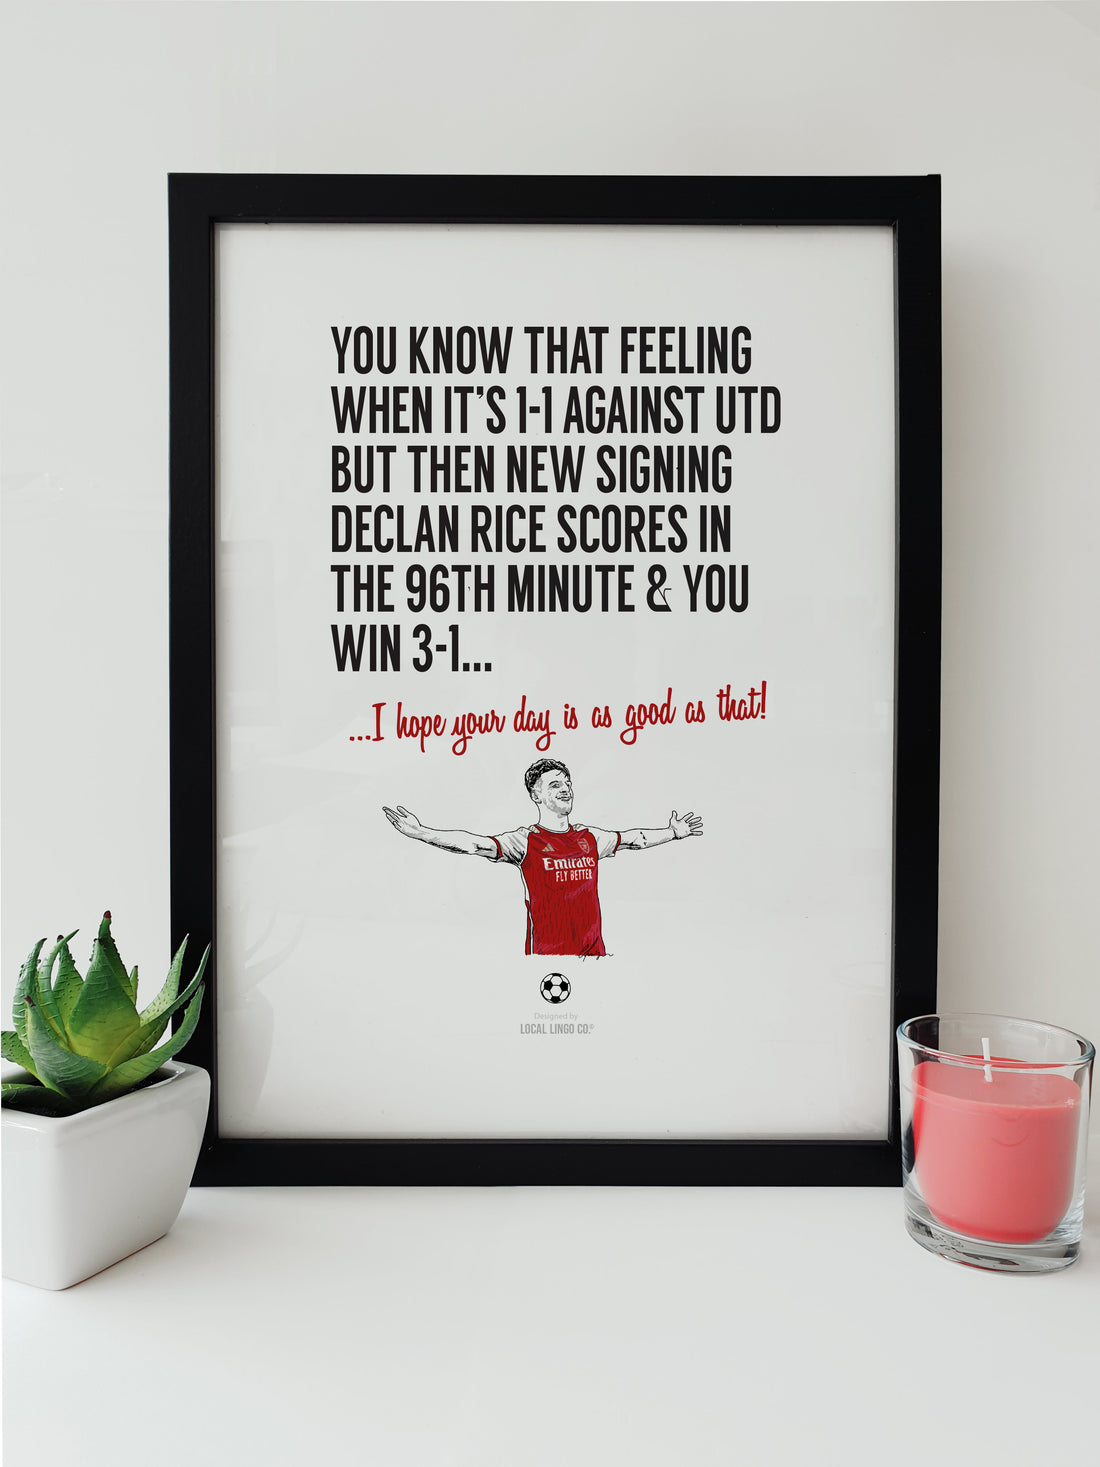 Stylish Arsenal FC print featuring Declan Rice celebrating his 96th-minute goal, with the text 'I love you more than that!' - ideal for A3 or A4 framing.